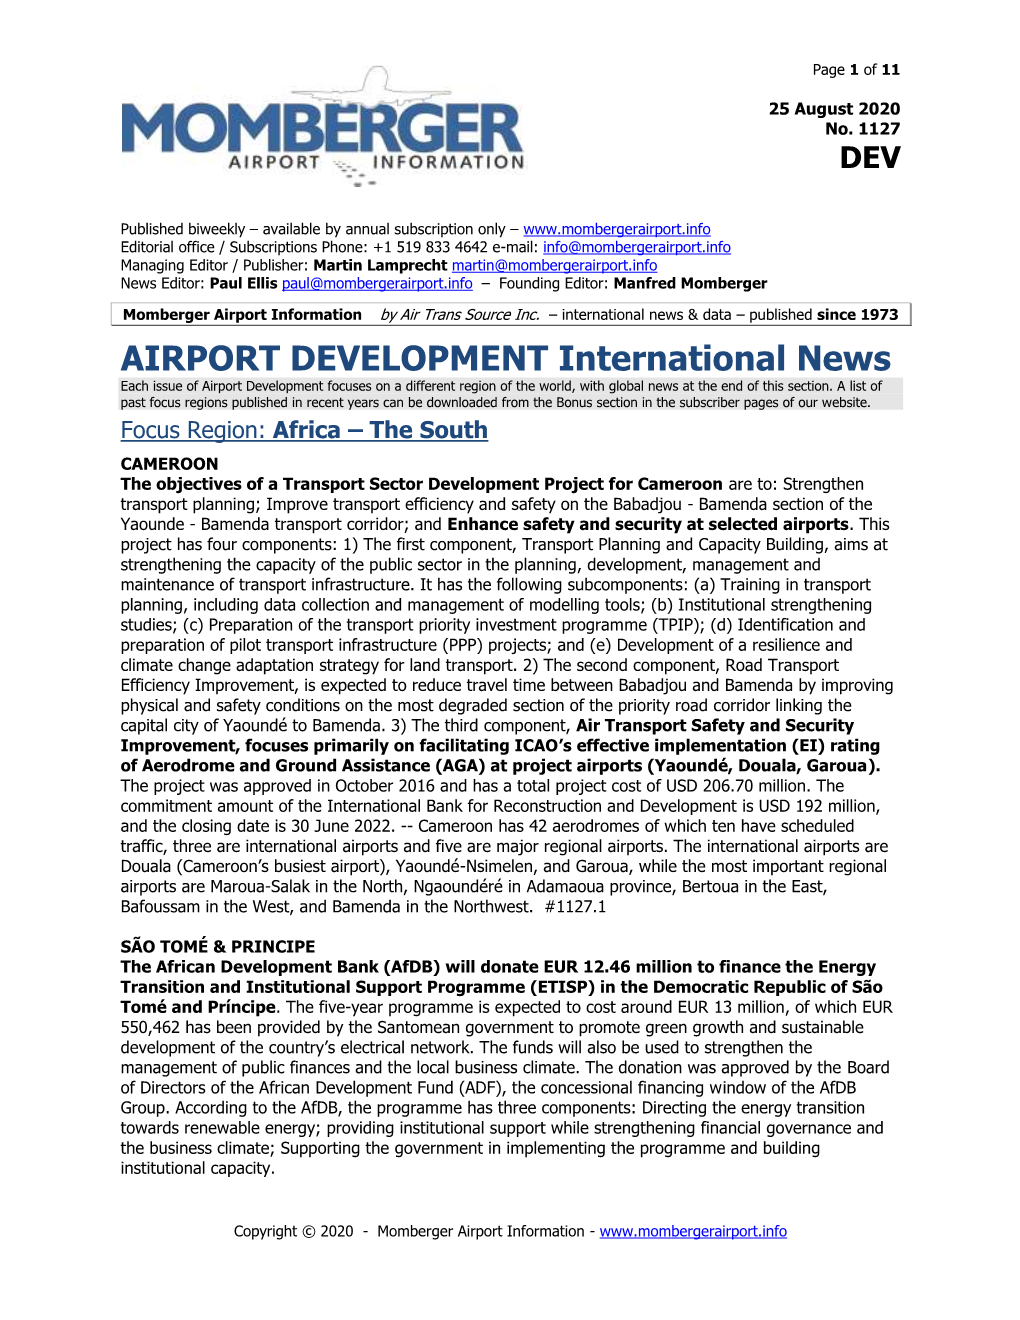 AIRPORT DEVELOPMENT International News Each Issue of Airport Development Focuses on a Different Region of the World, with Global News at the End of This Section